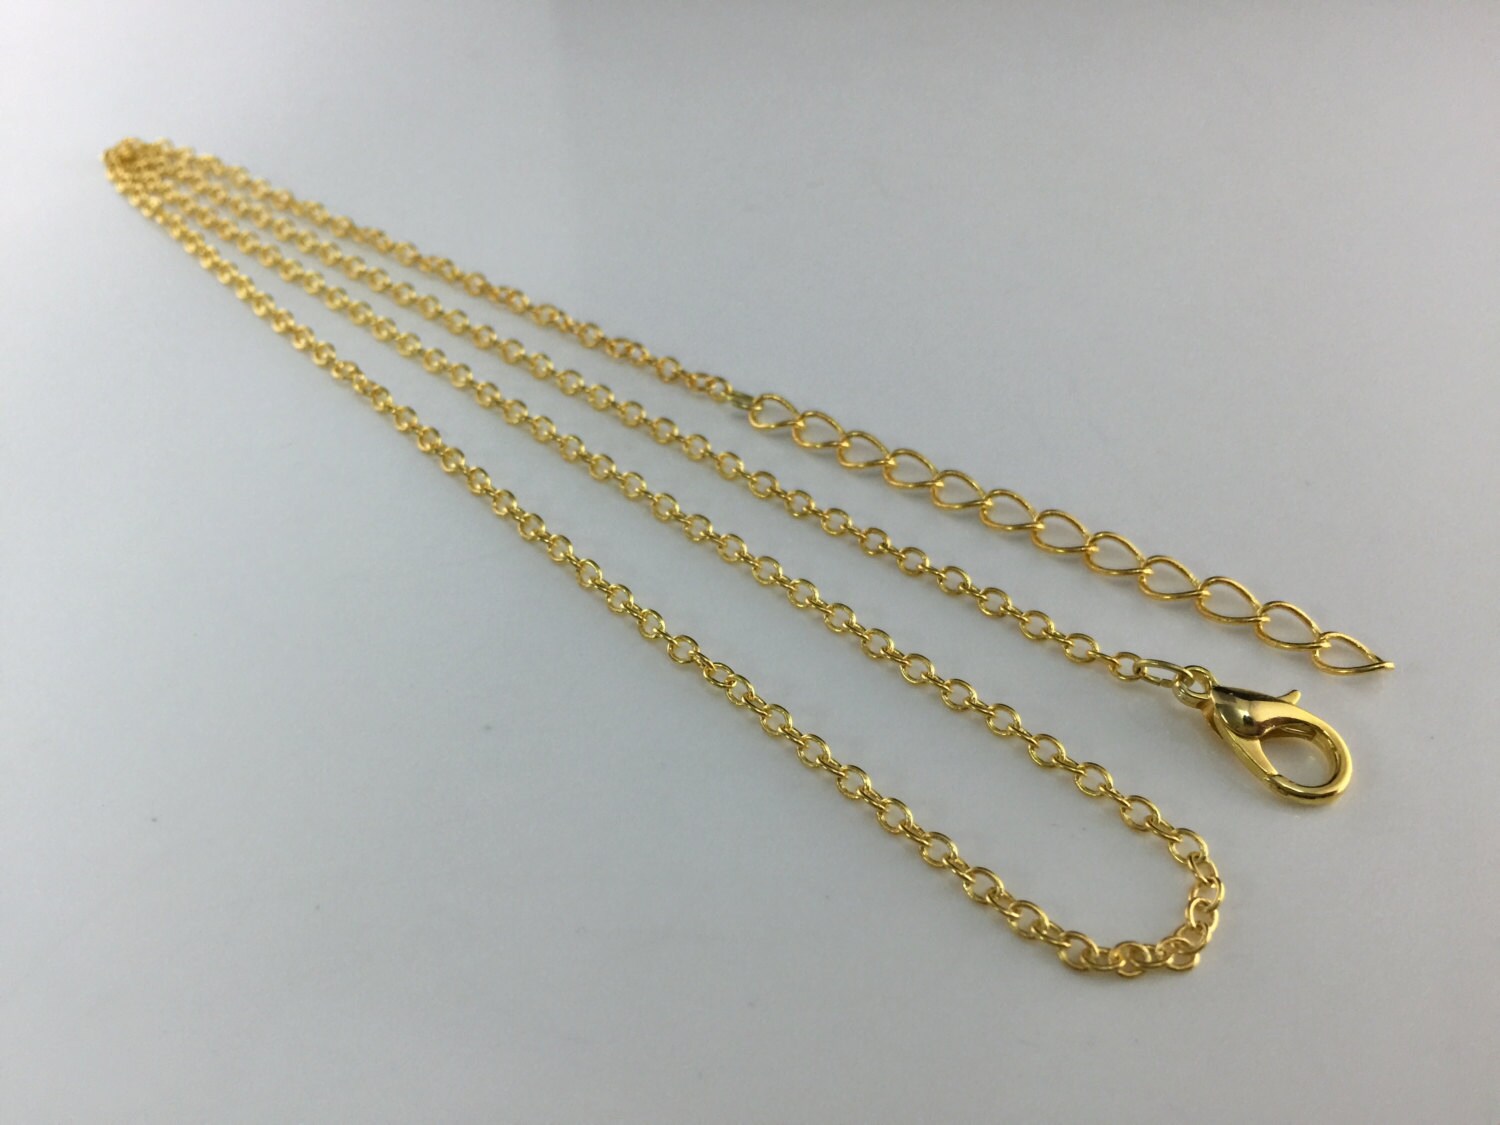 Gold Chain Necklace 2.5mm X 2mm Oval Links Chain Whole Sale - Etsy